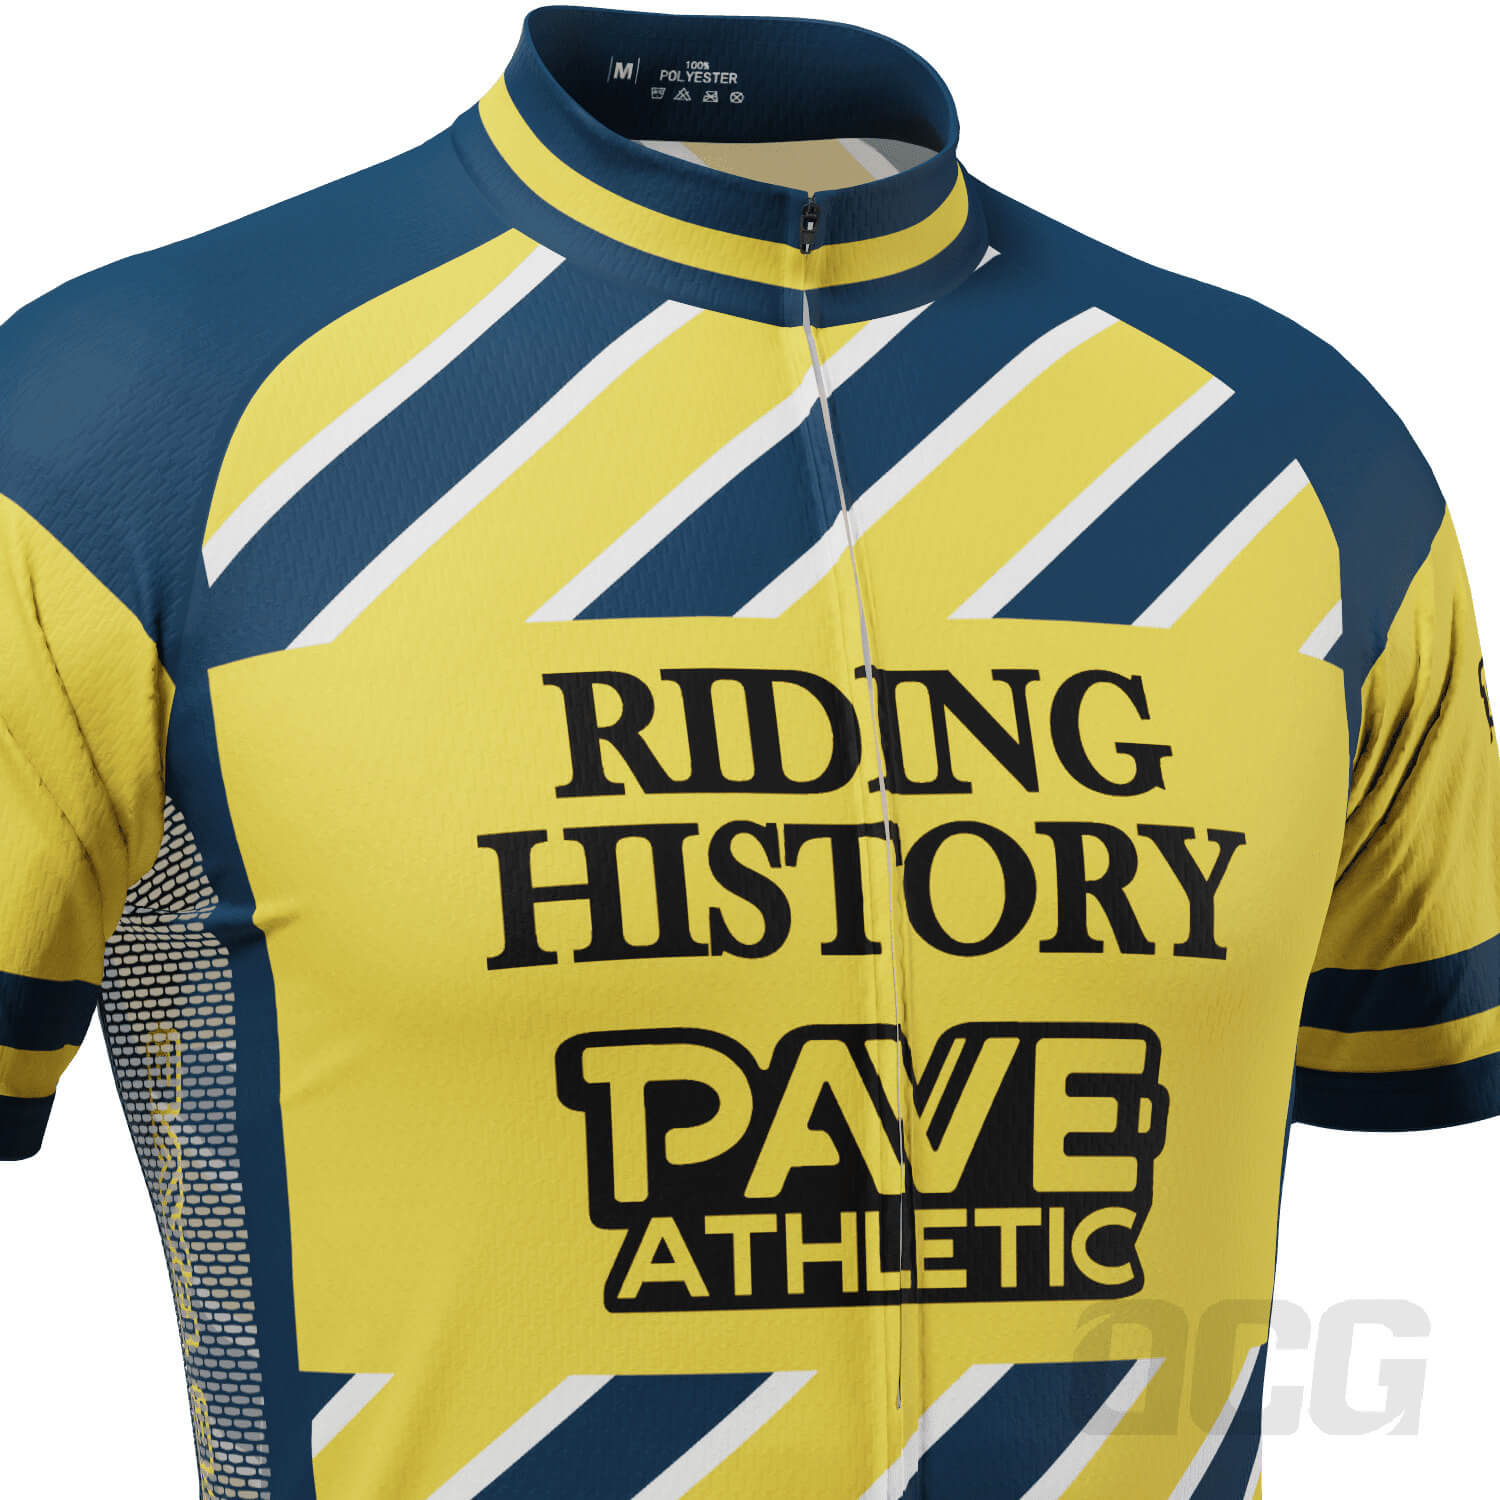 Men's PAVE Athletic Banque Retro Short Sleeve Cycling Jersey